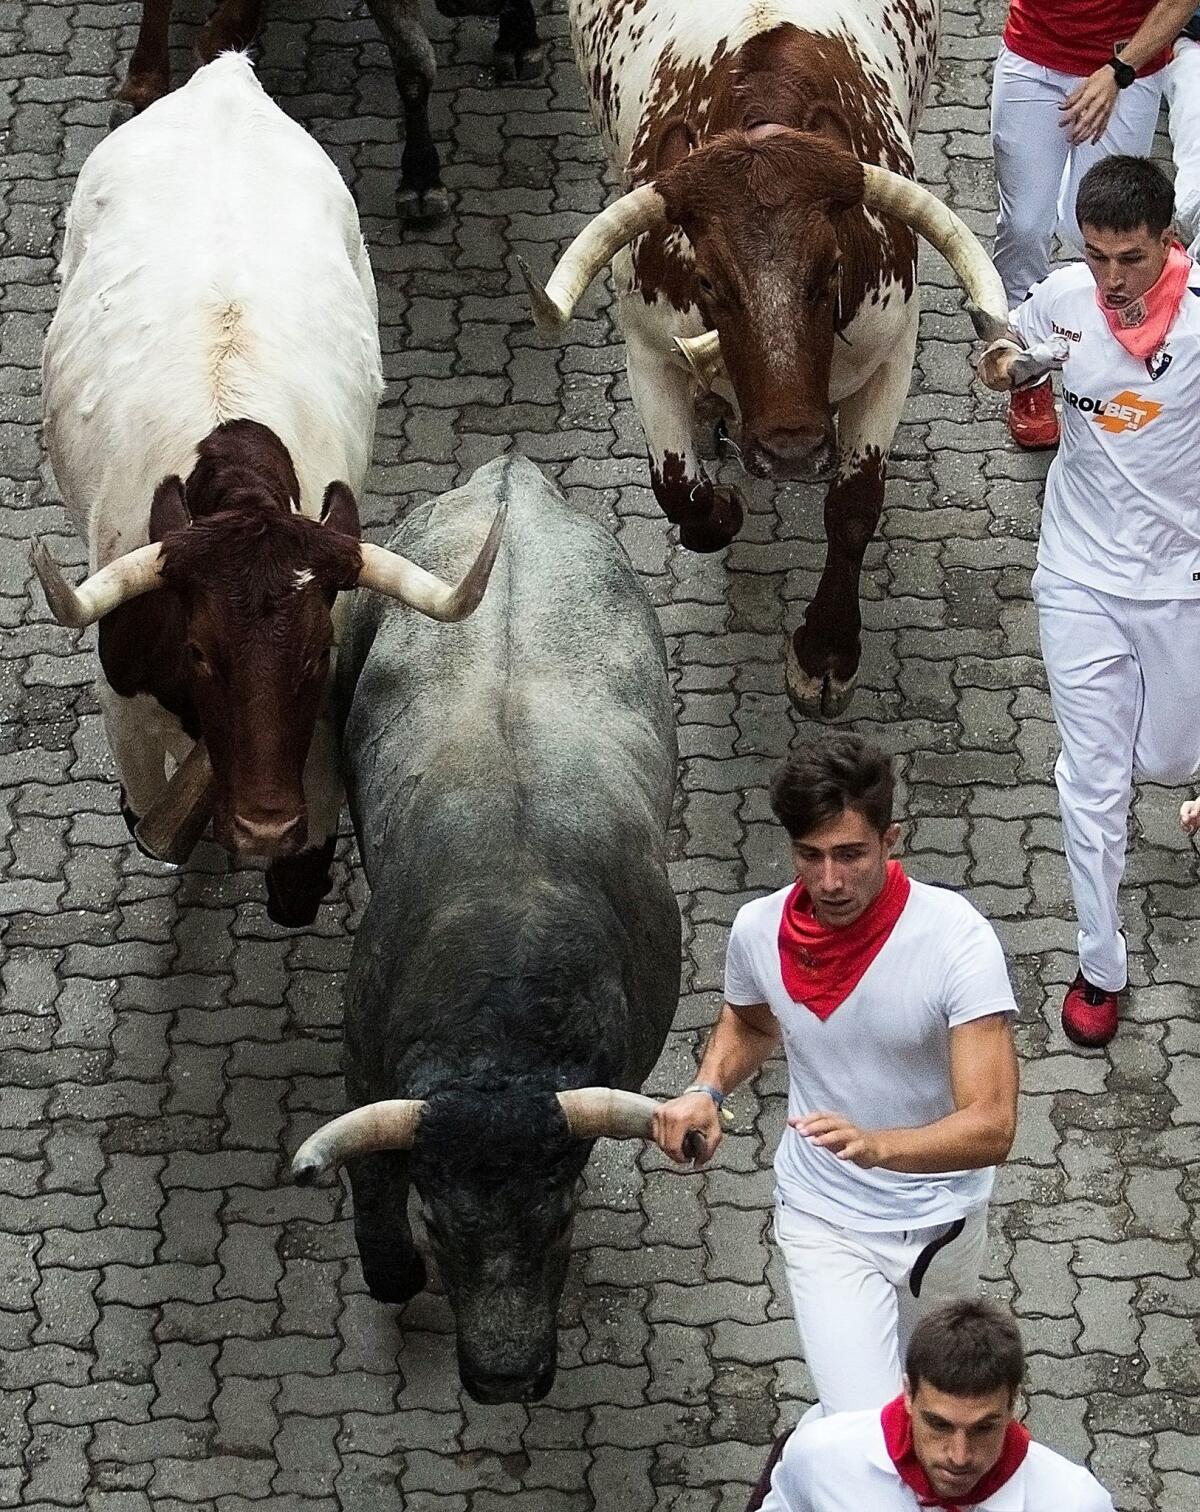 Participants and bulls are inches apart during the third bull run of the Fiesta de San Fermin in Pamplona, Spain.